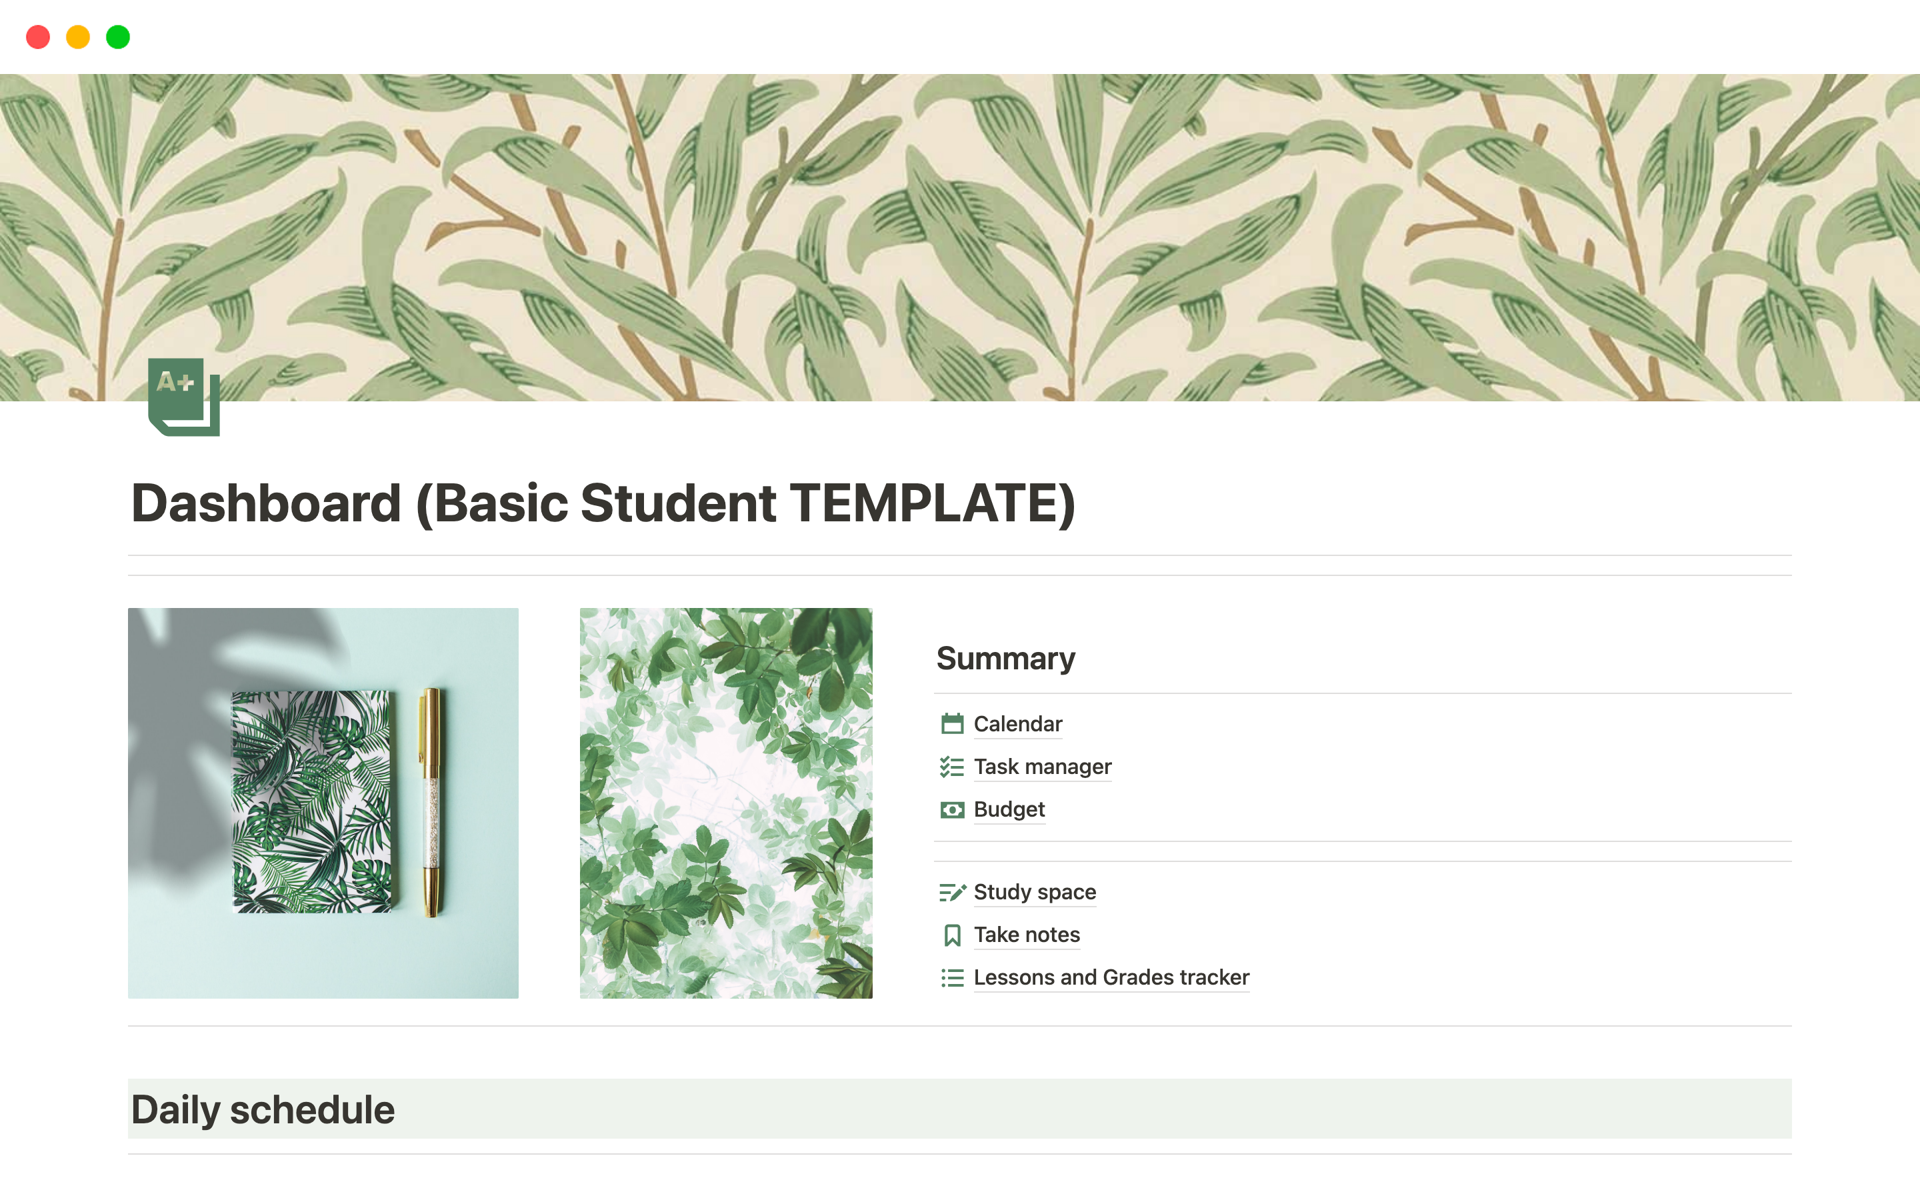 It's a simple and minimalist template but quite useful if you need to organize your days as a student, resume or even take notes and have them all at the same place.